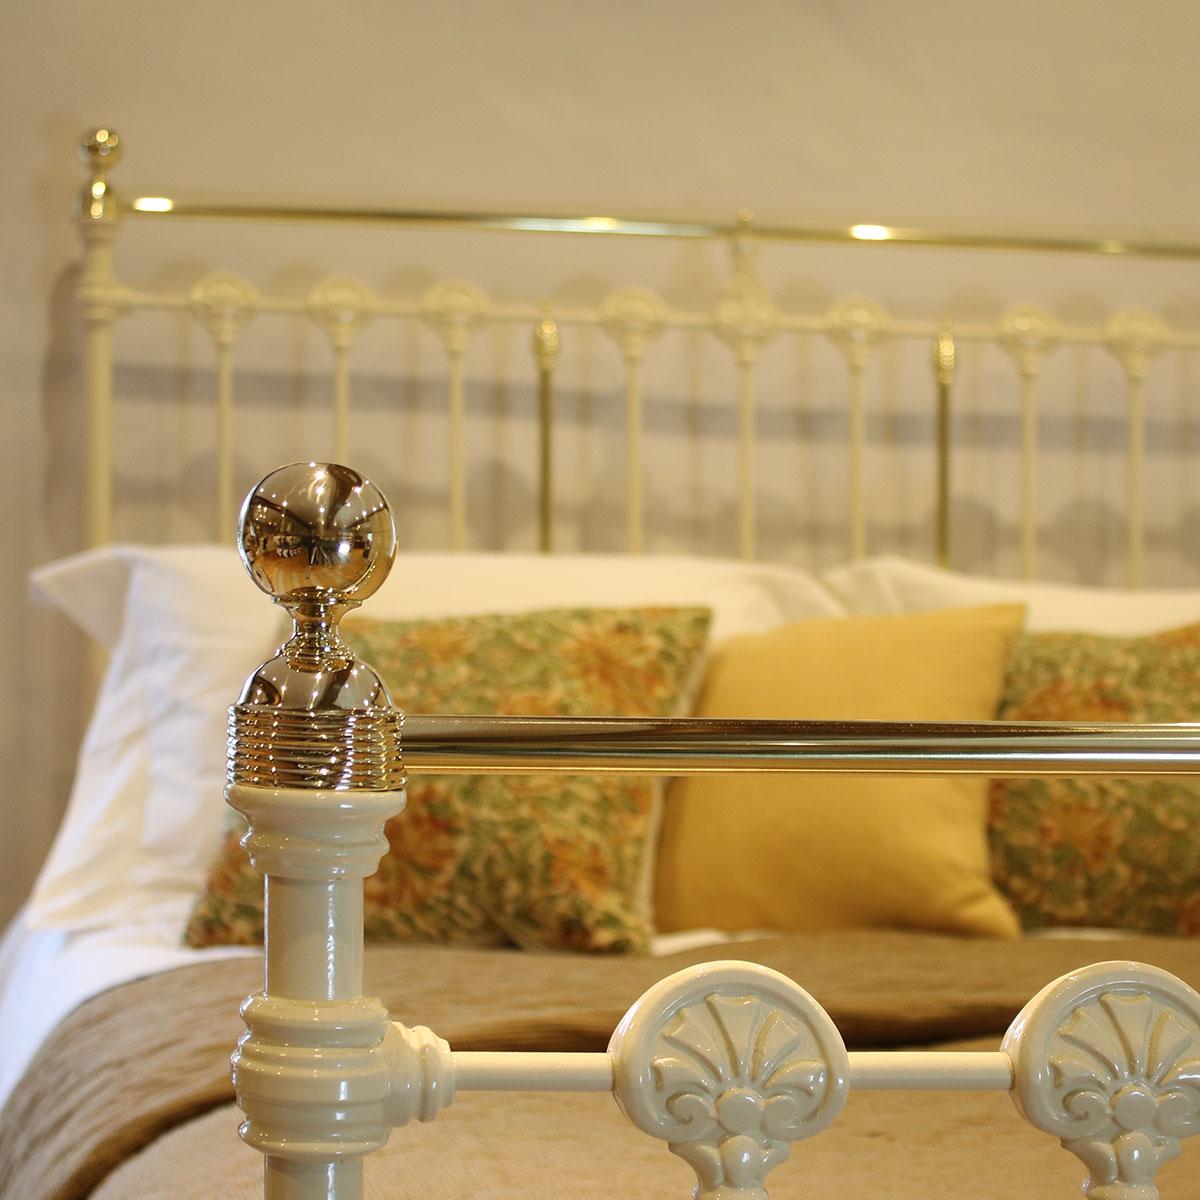 A classic style antique bed in cream with straight brass top rail and large attractive decorative castings.

This bed accepts a UK King size or US Queen size (5ft, 60in or 150cm wide) base and mattress set.

The price includes a standard firm